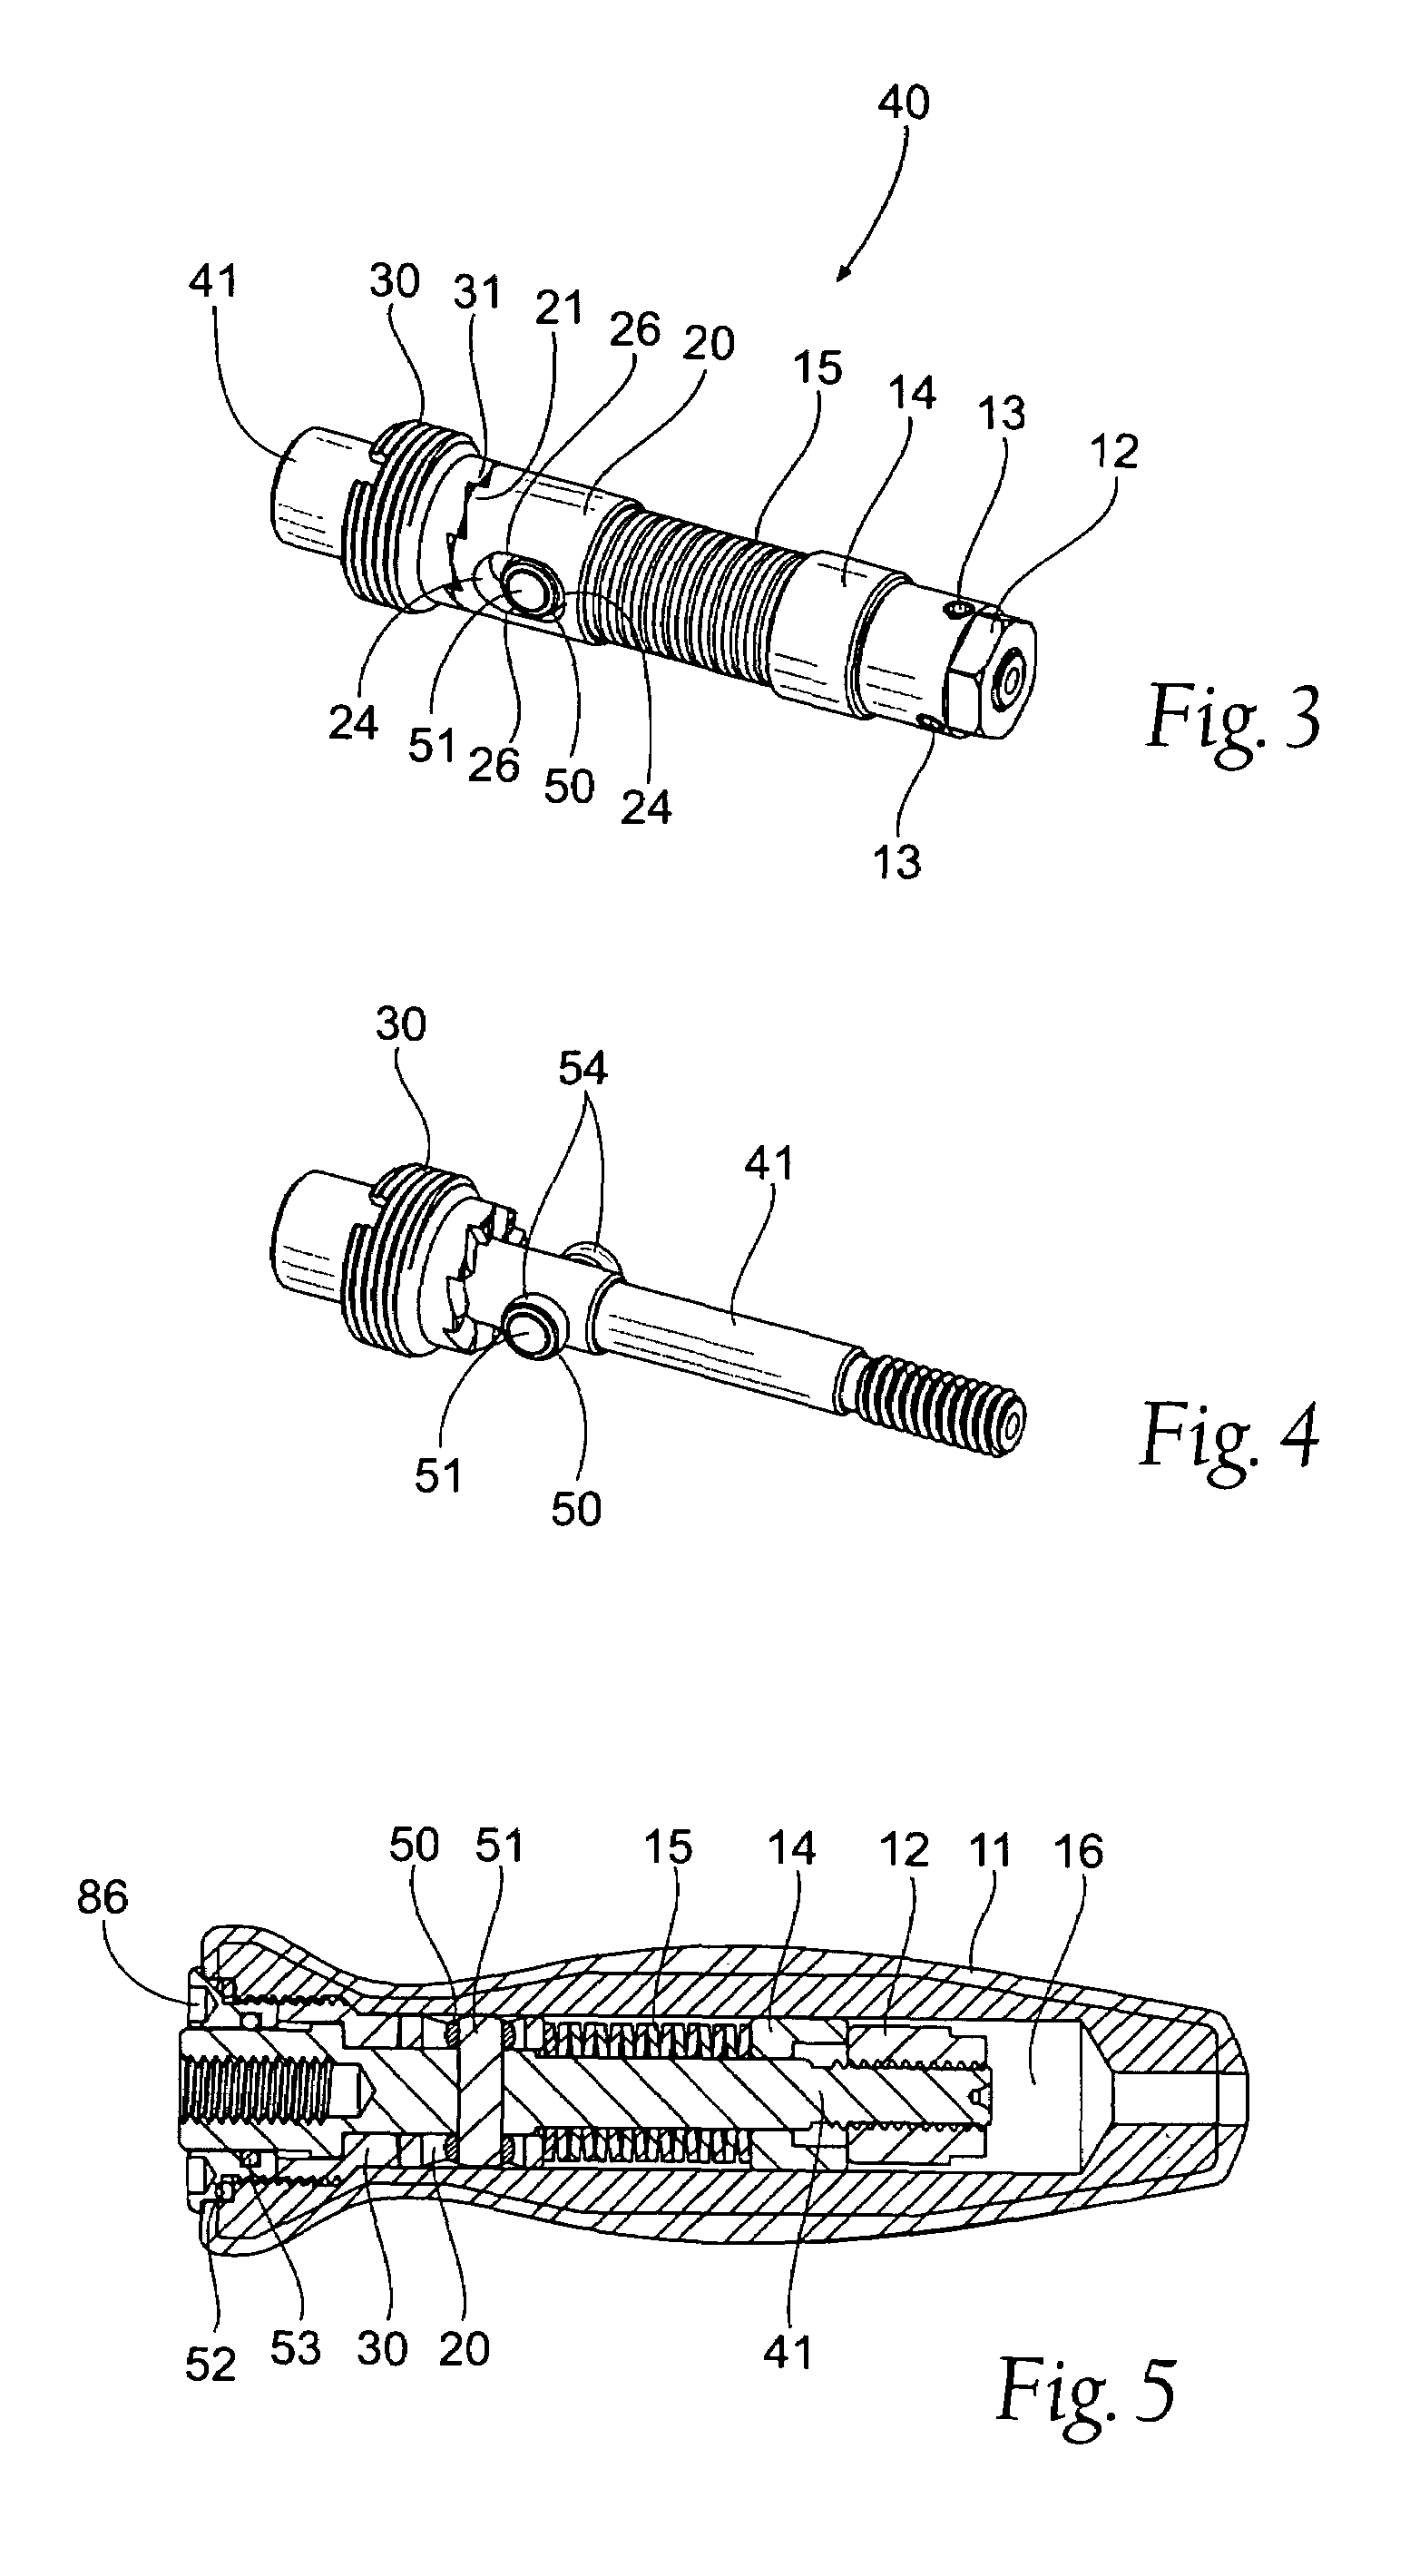 Torque limiting driver and assembly